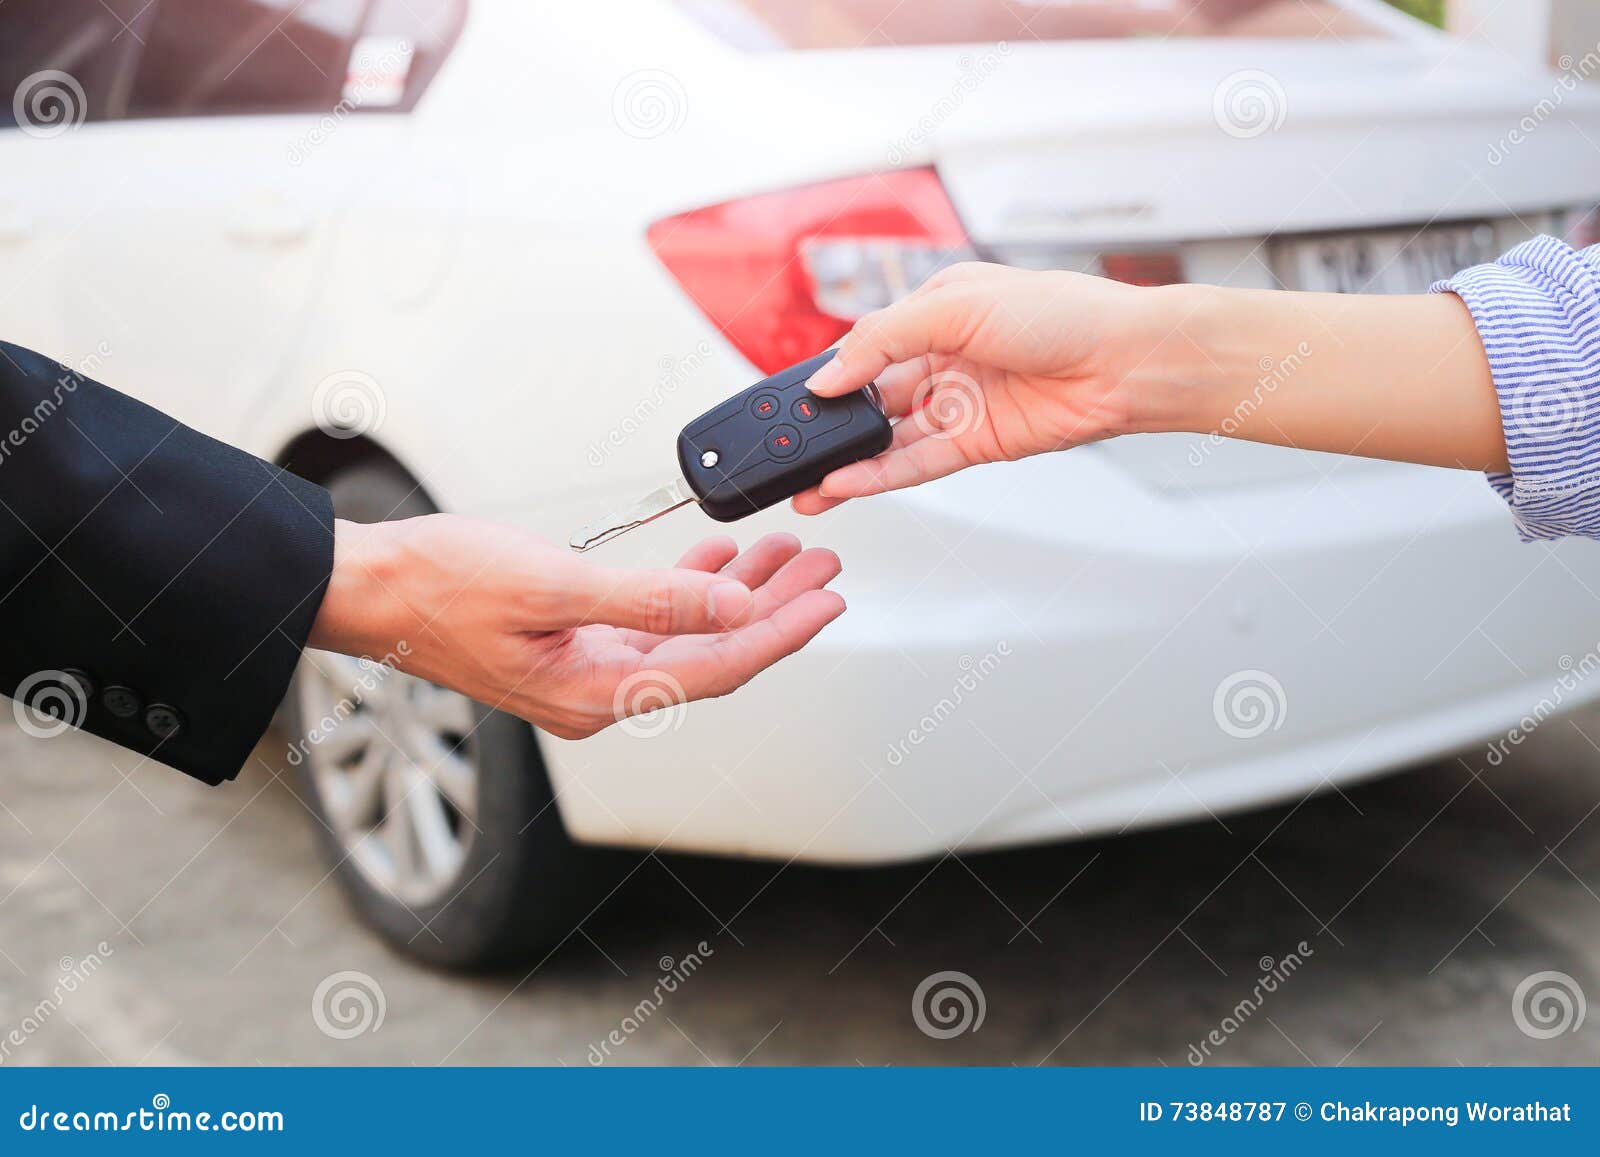 business hand giving a key for buyer or rental car.